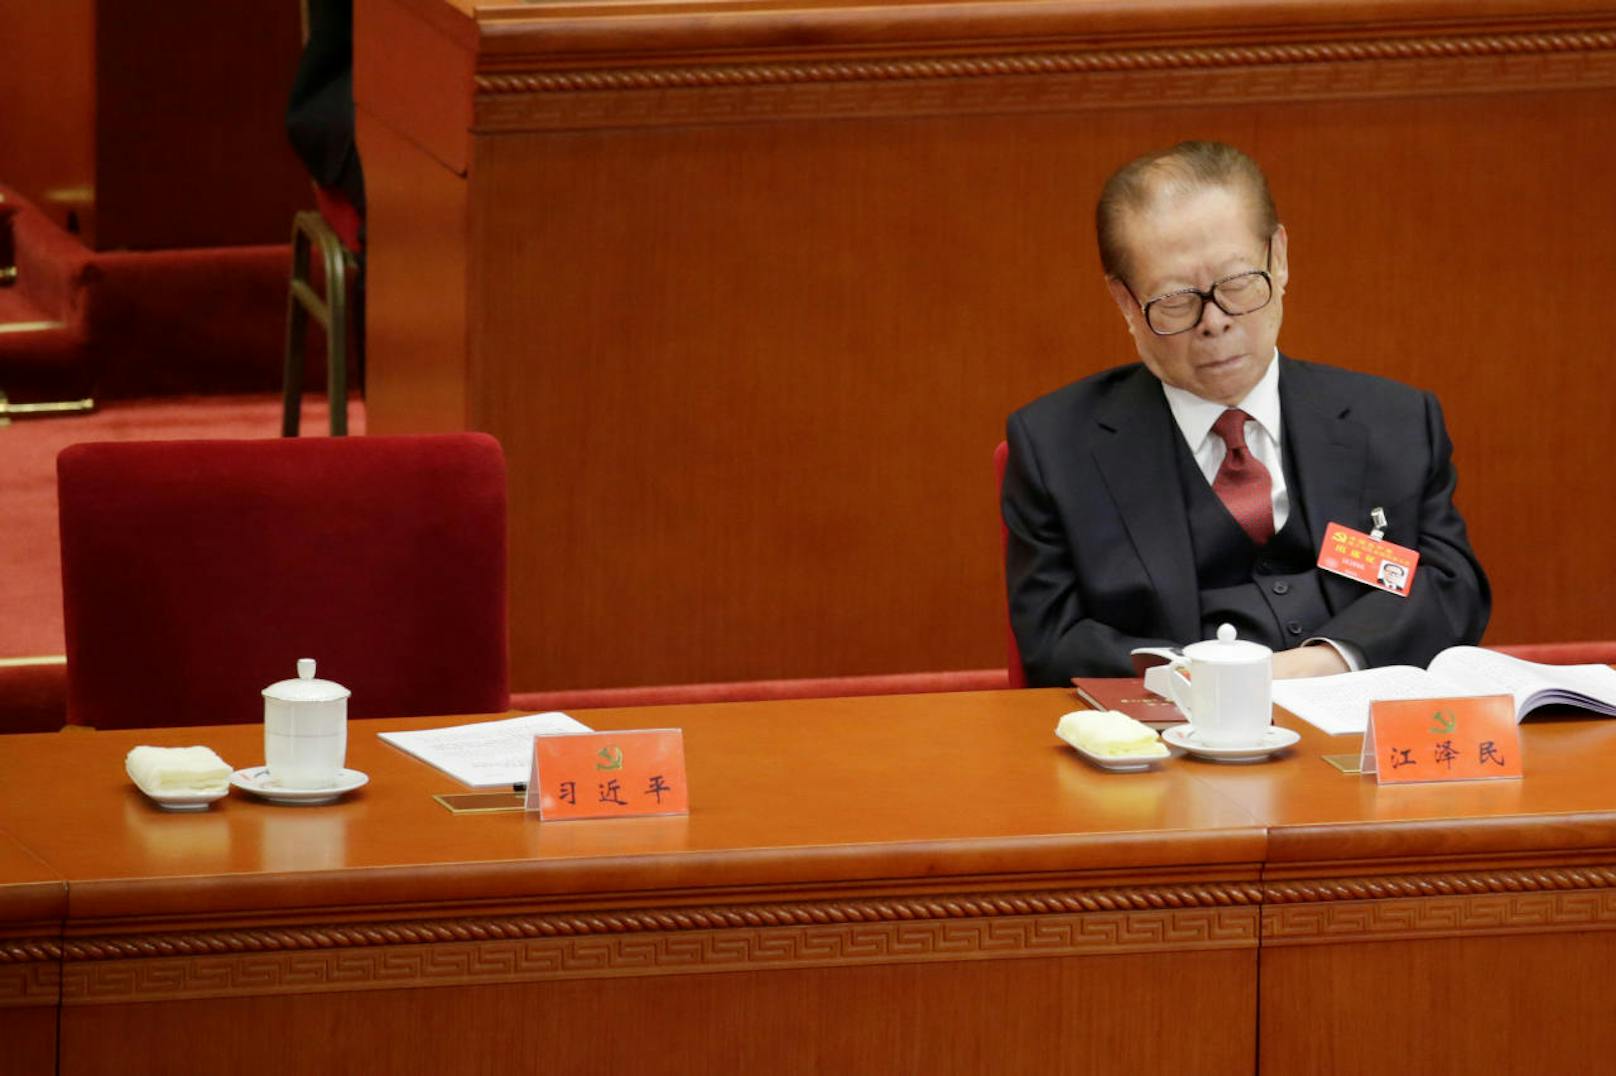 Former Chinese President Jiang Zemin is seen during the opening of the 19th National Congress of the Communist Party of China at the Great Hall of the People in Beijing, China October 18, 2017.  REUTERS/Aly Song - RC111F6BCB00